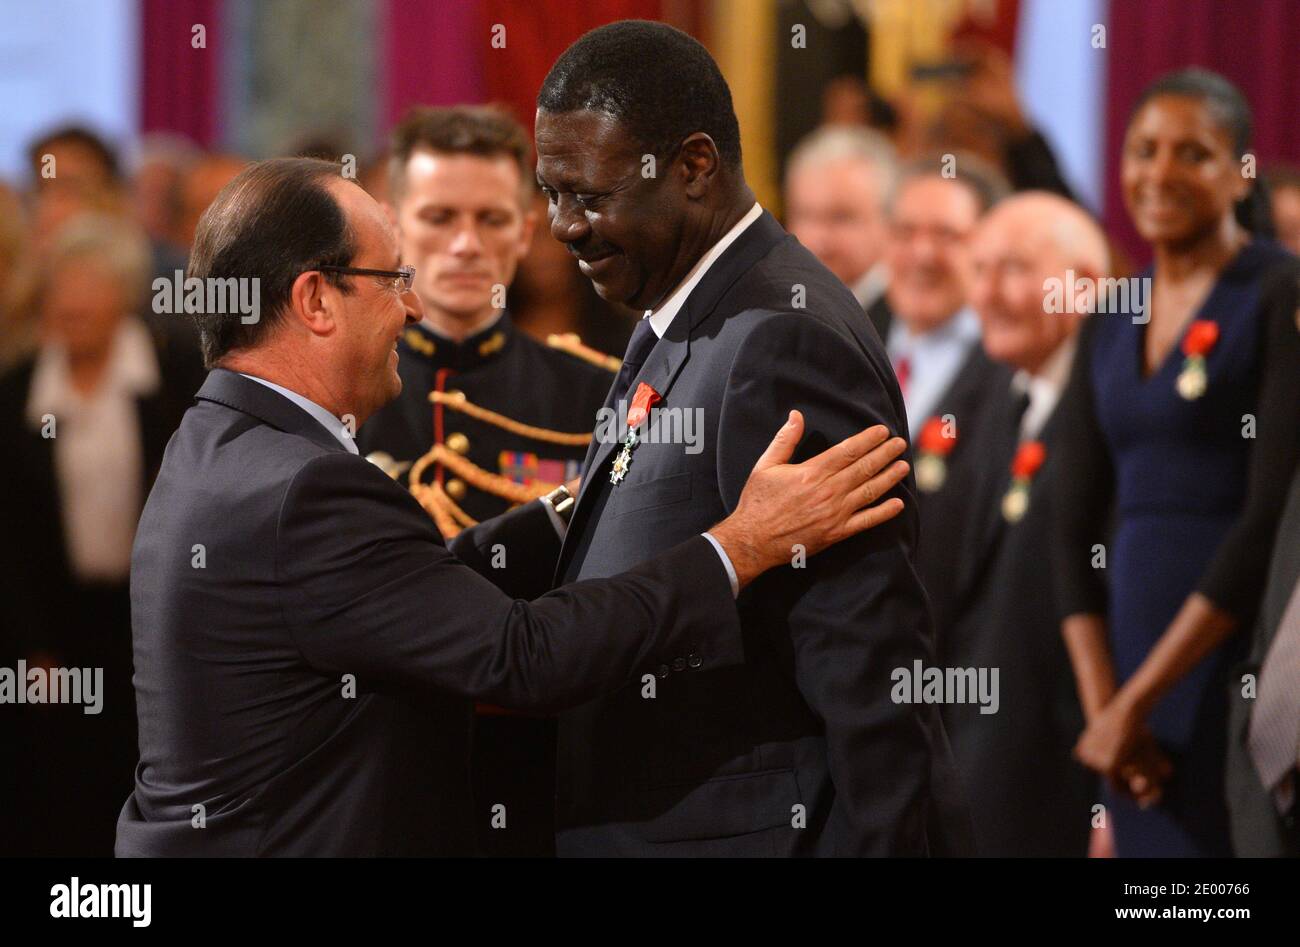 French President Francois Hollande (L) awards the Legion of Honor and National Order of Merit insignia to former Olympique de Marseille football club president Pape Diouf (R) during a ceremony to award French sports personalities at the Elysee Palace in Paris, France on October 9, 2013. Photo by Christian Liewig/ABACAPRESS.COM Stock Photo